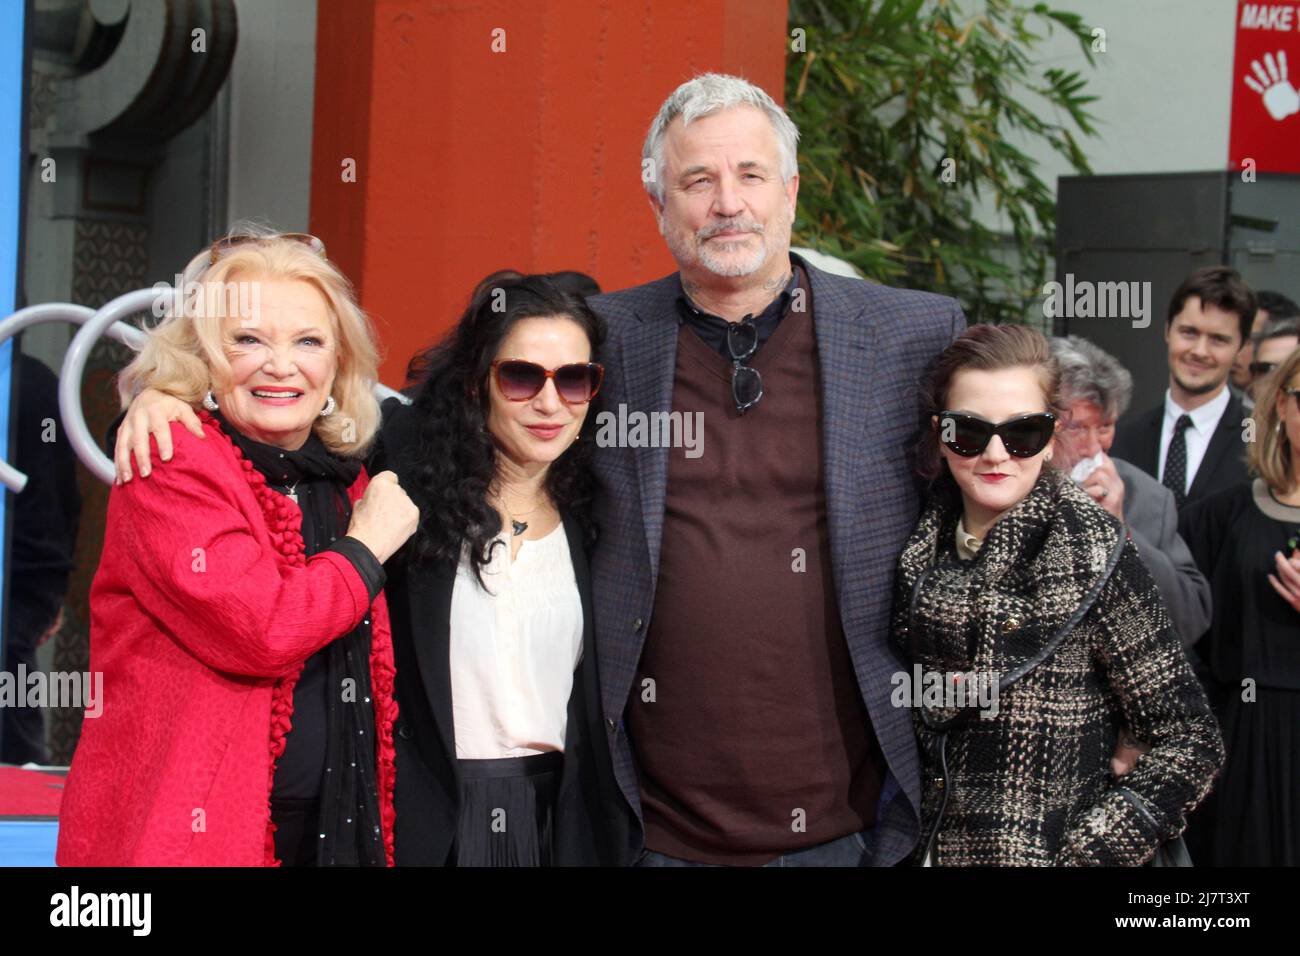 LOS ANGELES - DEC 5:  Gena Rowlands, Alexandra Cassavetes, Nick Cassavetes, Zoe Cassavetes at the Gena Rowlands Hand and Foot Print Ceremony at the TCL Chinese Theater on December 5, 2014 in Los Angeles, CA Stock Photo